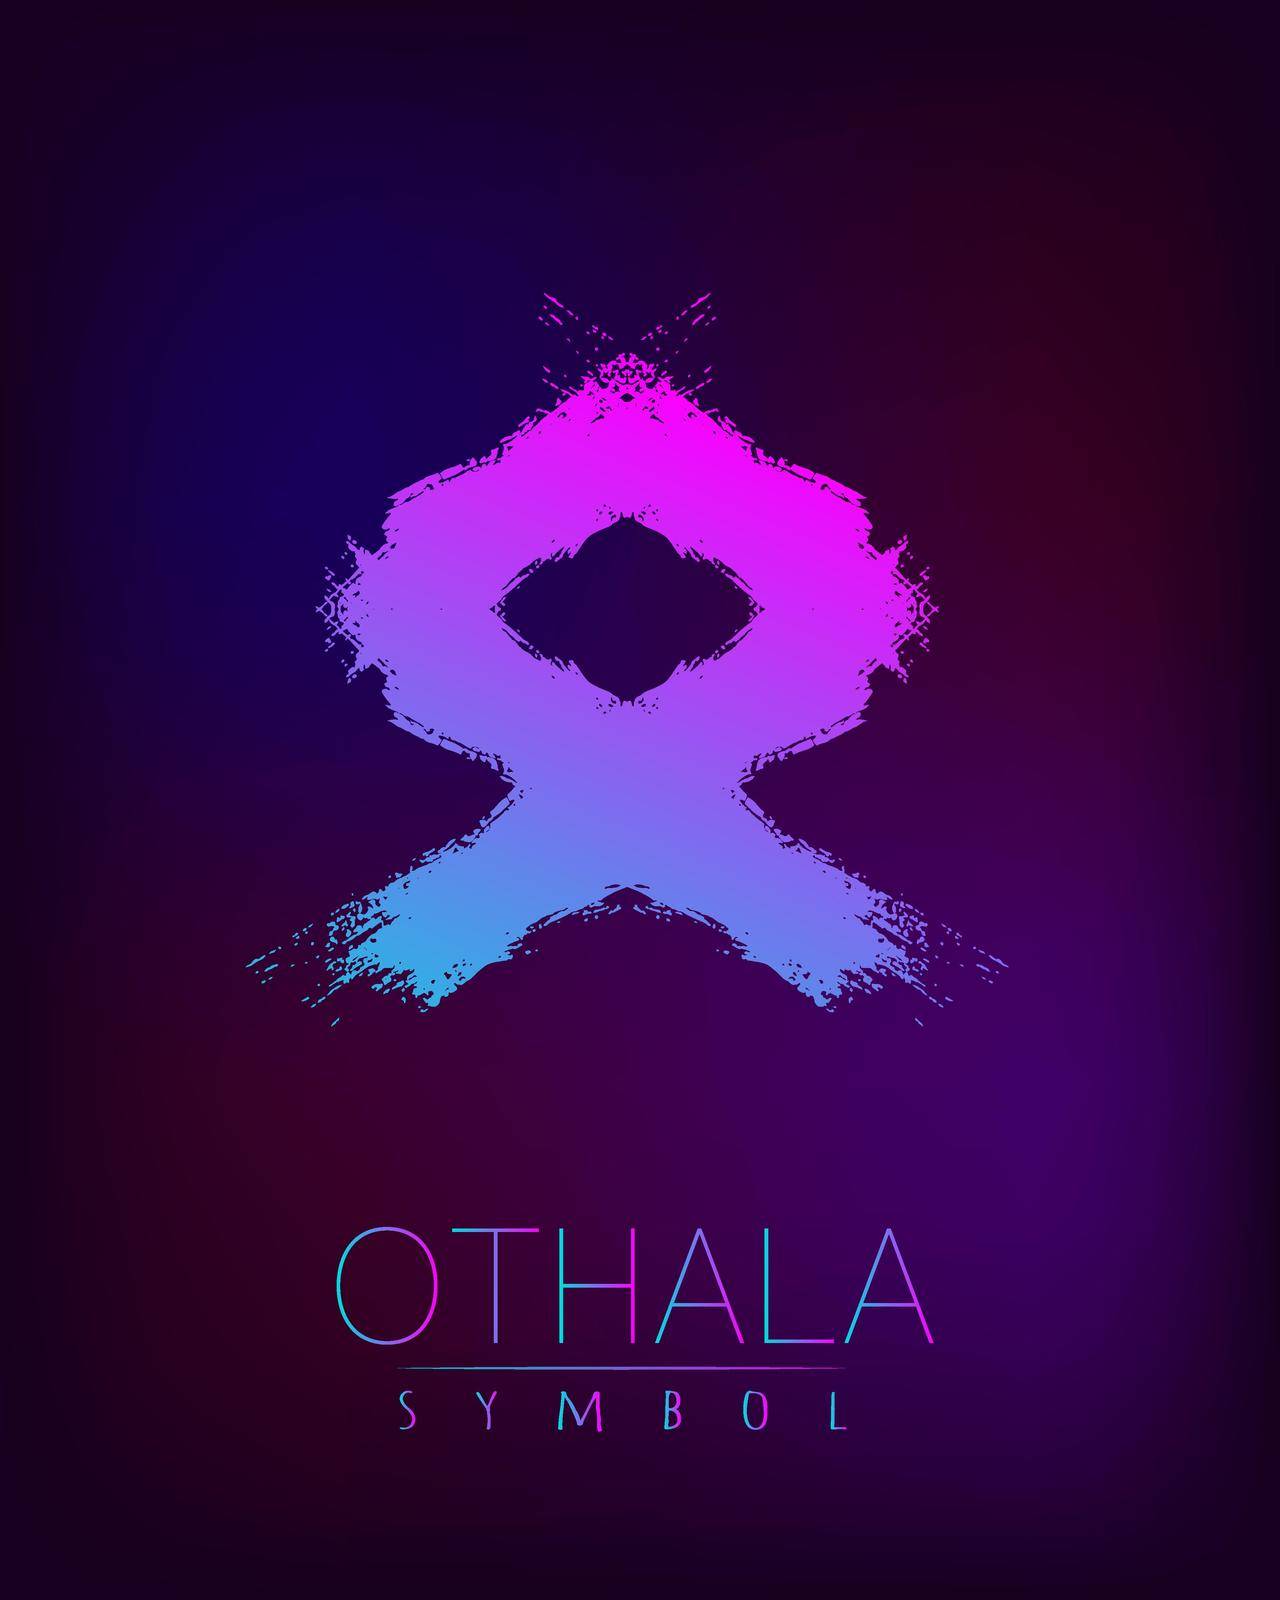 Rune Scandinavia is a Othala riches vector illustration. Symbol of Futhark letters. Brush stripes with trend gradient blue pink color on blur dark background. Magic and mystery sign. Spiritual.